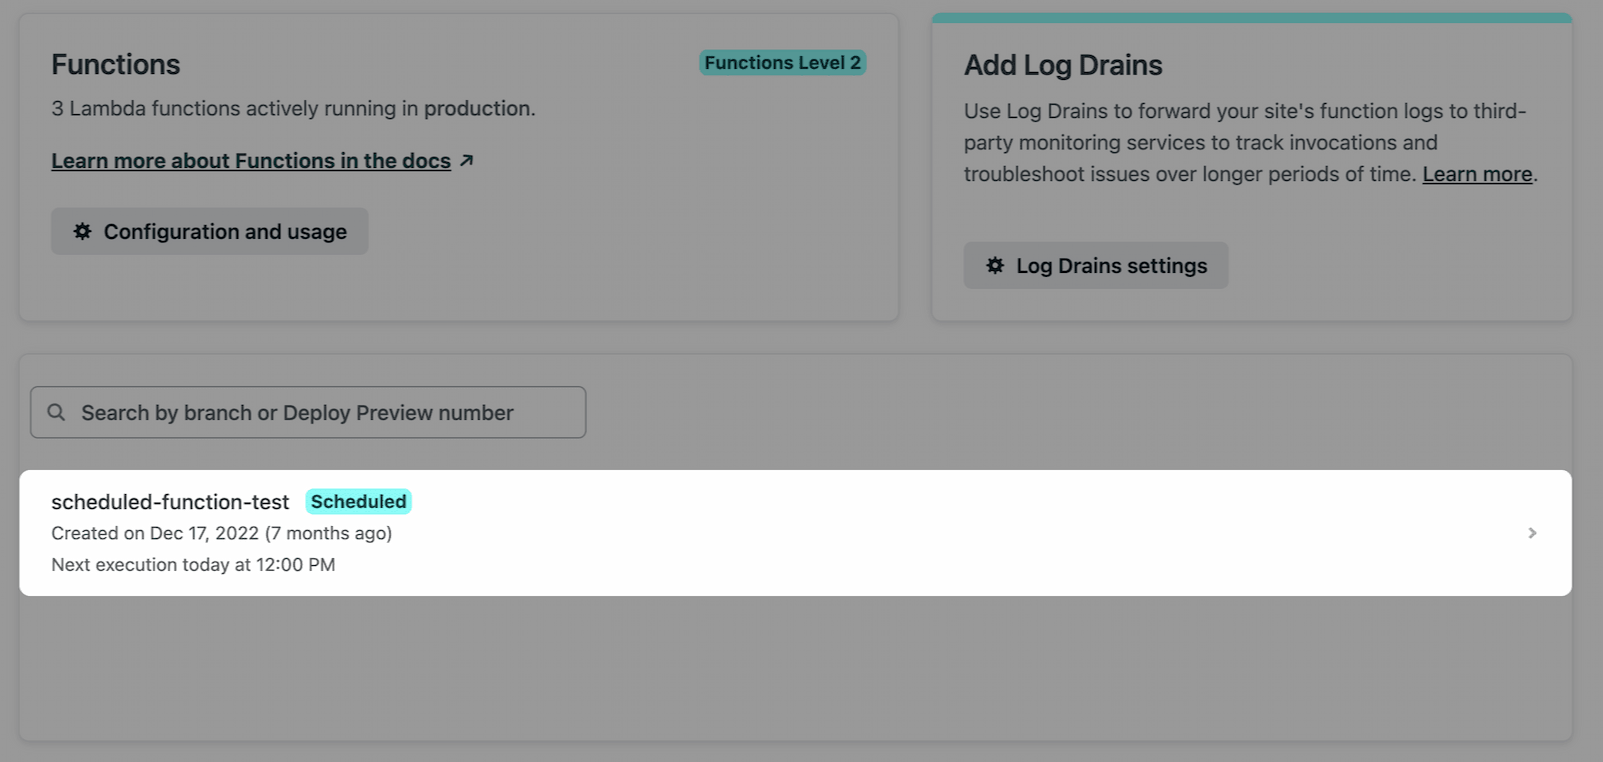 Example of a function list on the Functions page of the Netlify UI